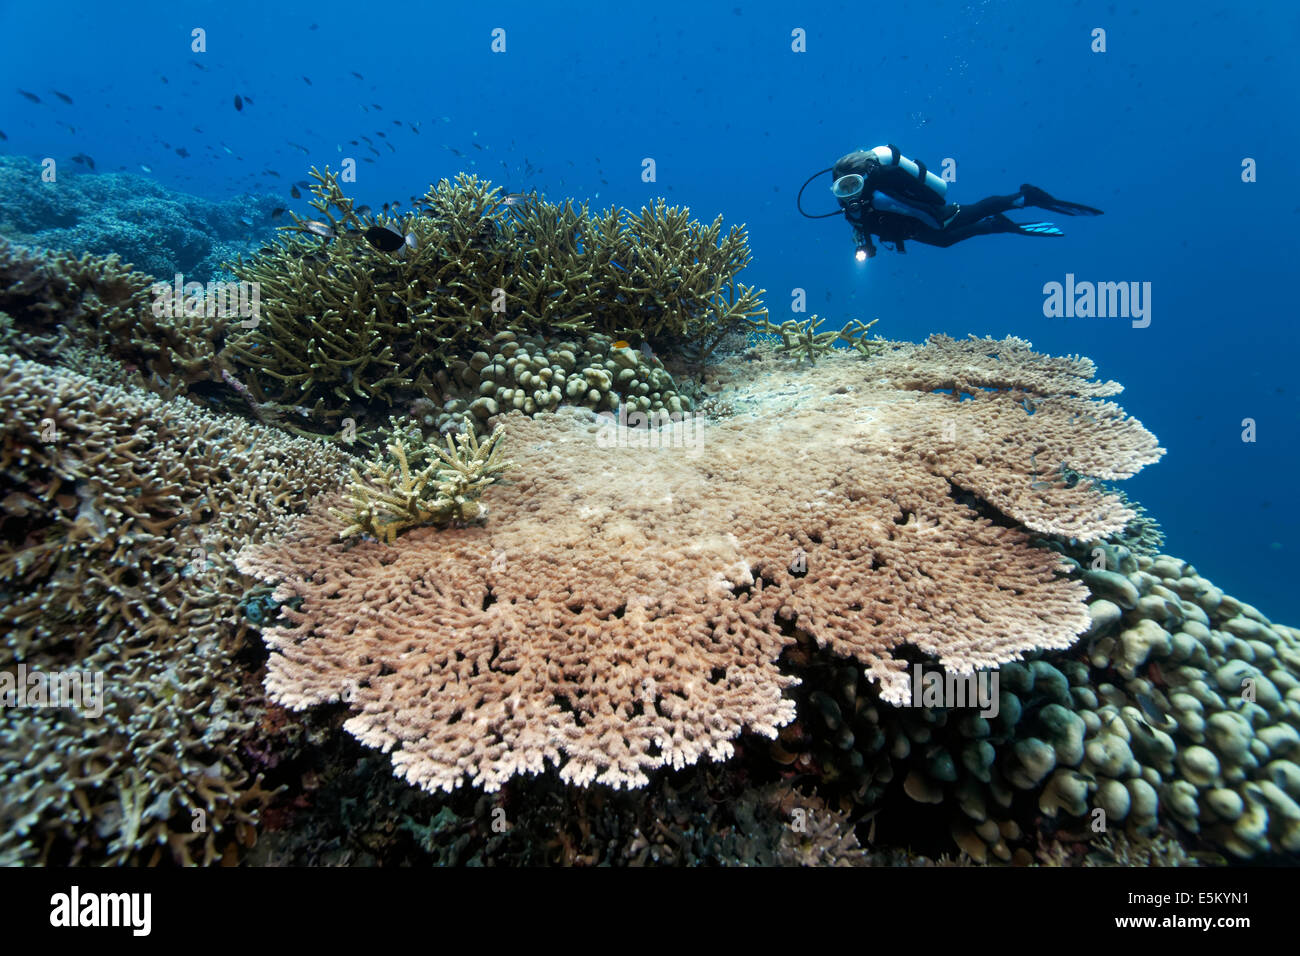 Coral reef with various stony corals, scuba diver at the back, Great Barrier Reef, UNESCO World Natural Heritage Site Stock Photo